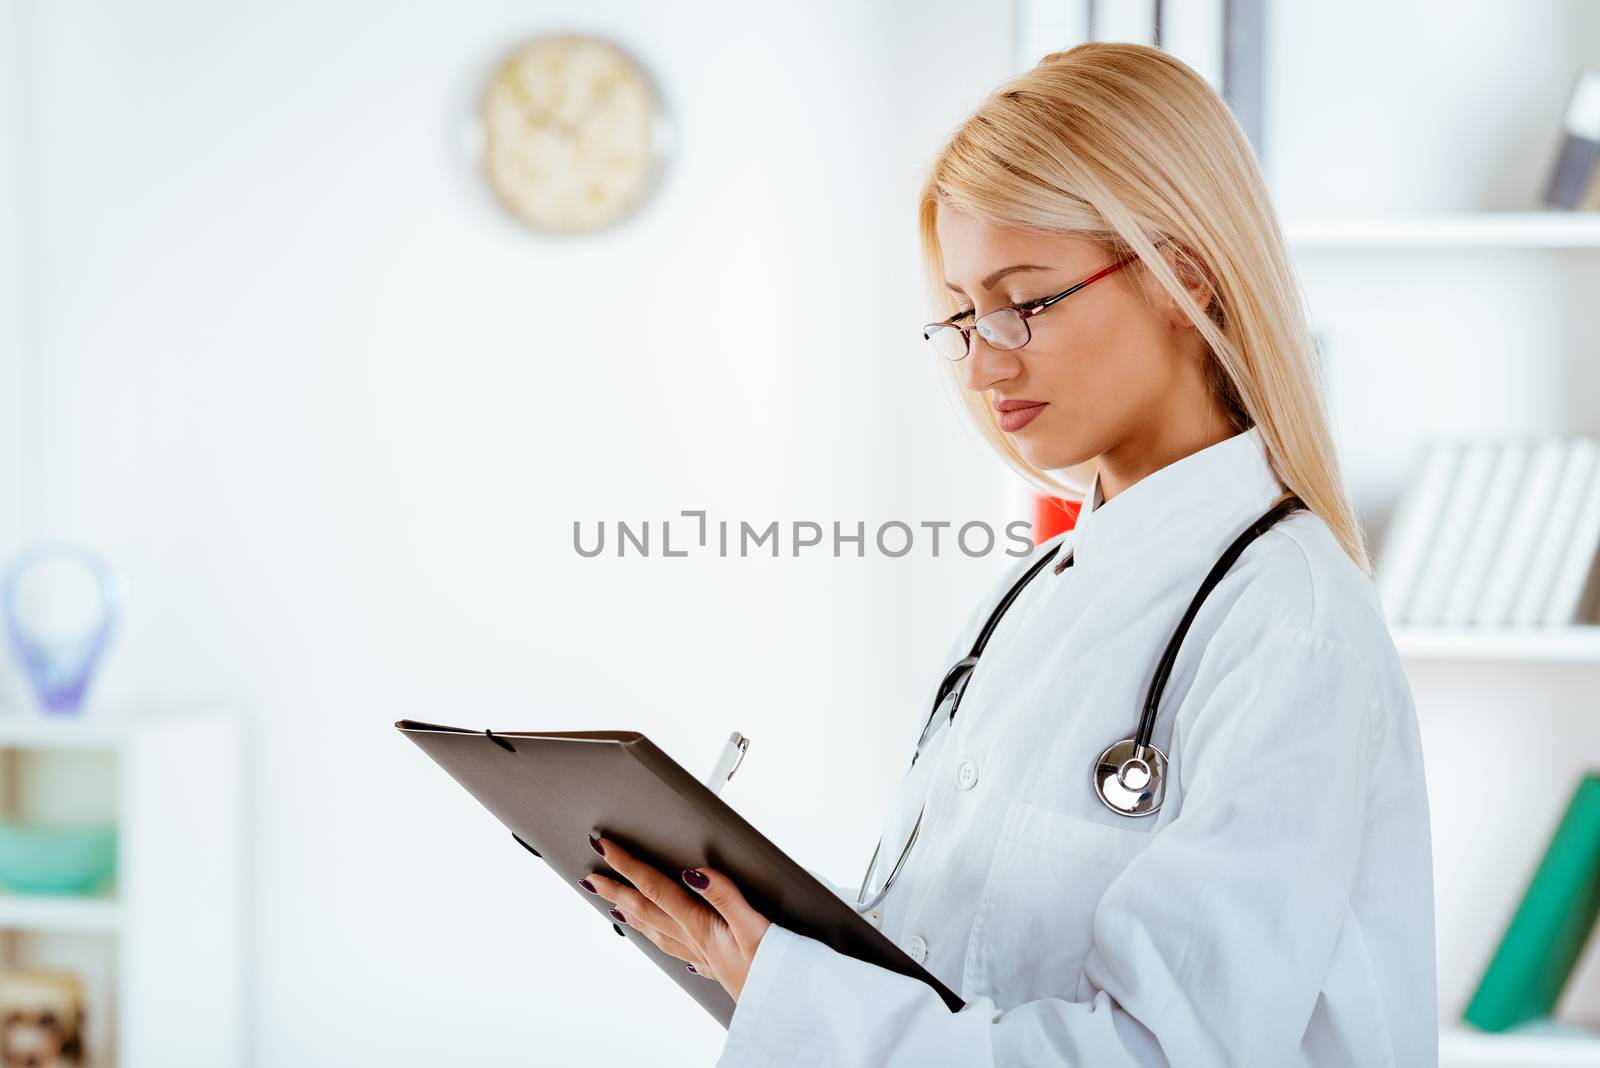 Young cute female doctor with the glasses, dressed in a white coat standing and holding folder with a stethoscope over the neck.